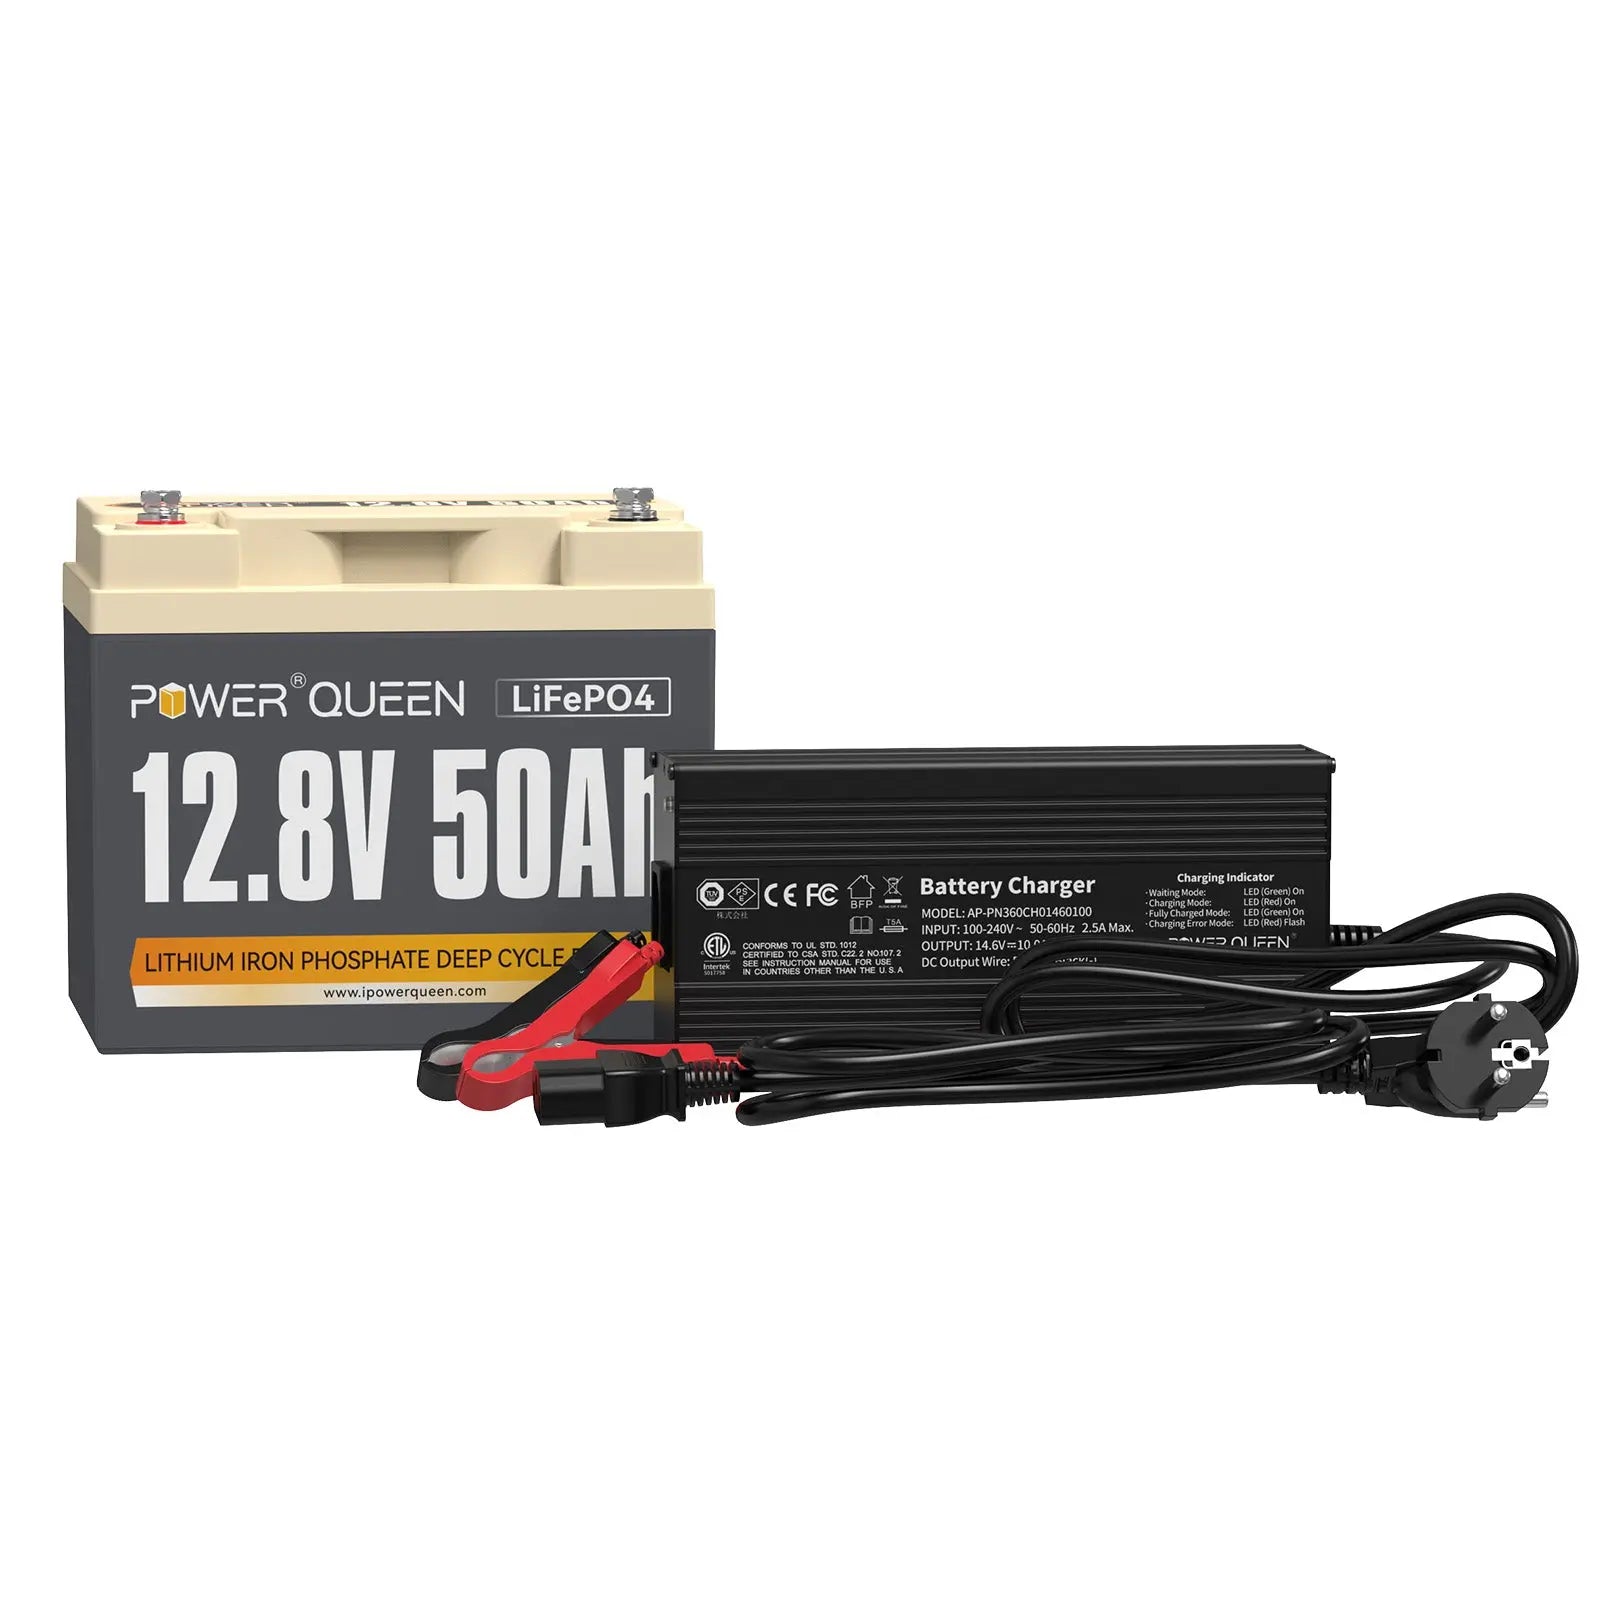 Power Queen 12.8V 50Ah LiFePO4 Battery + 14.6V 10A Charger Power Queen